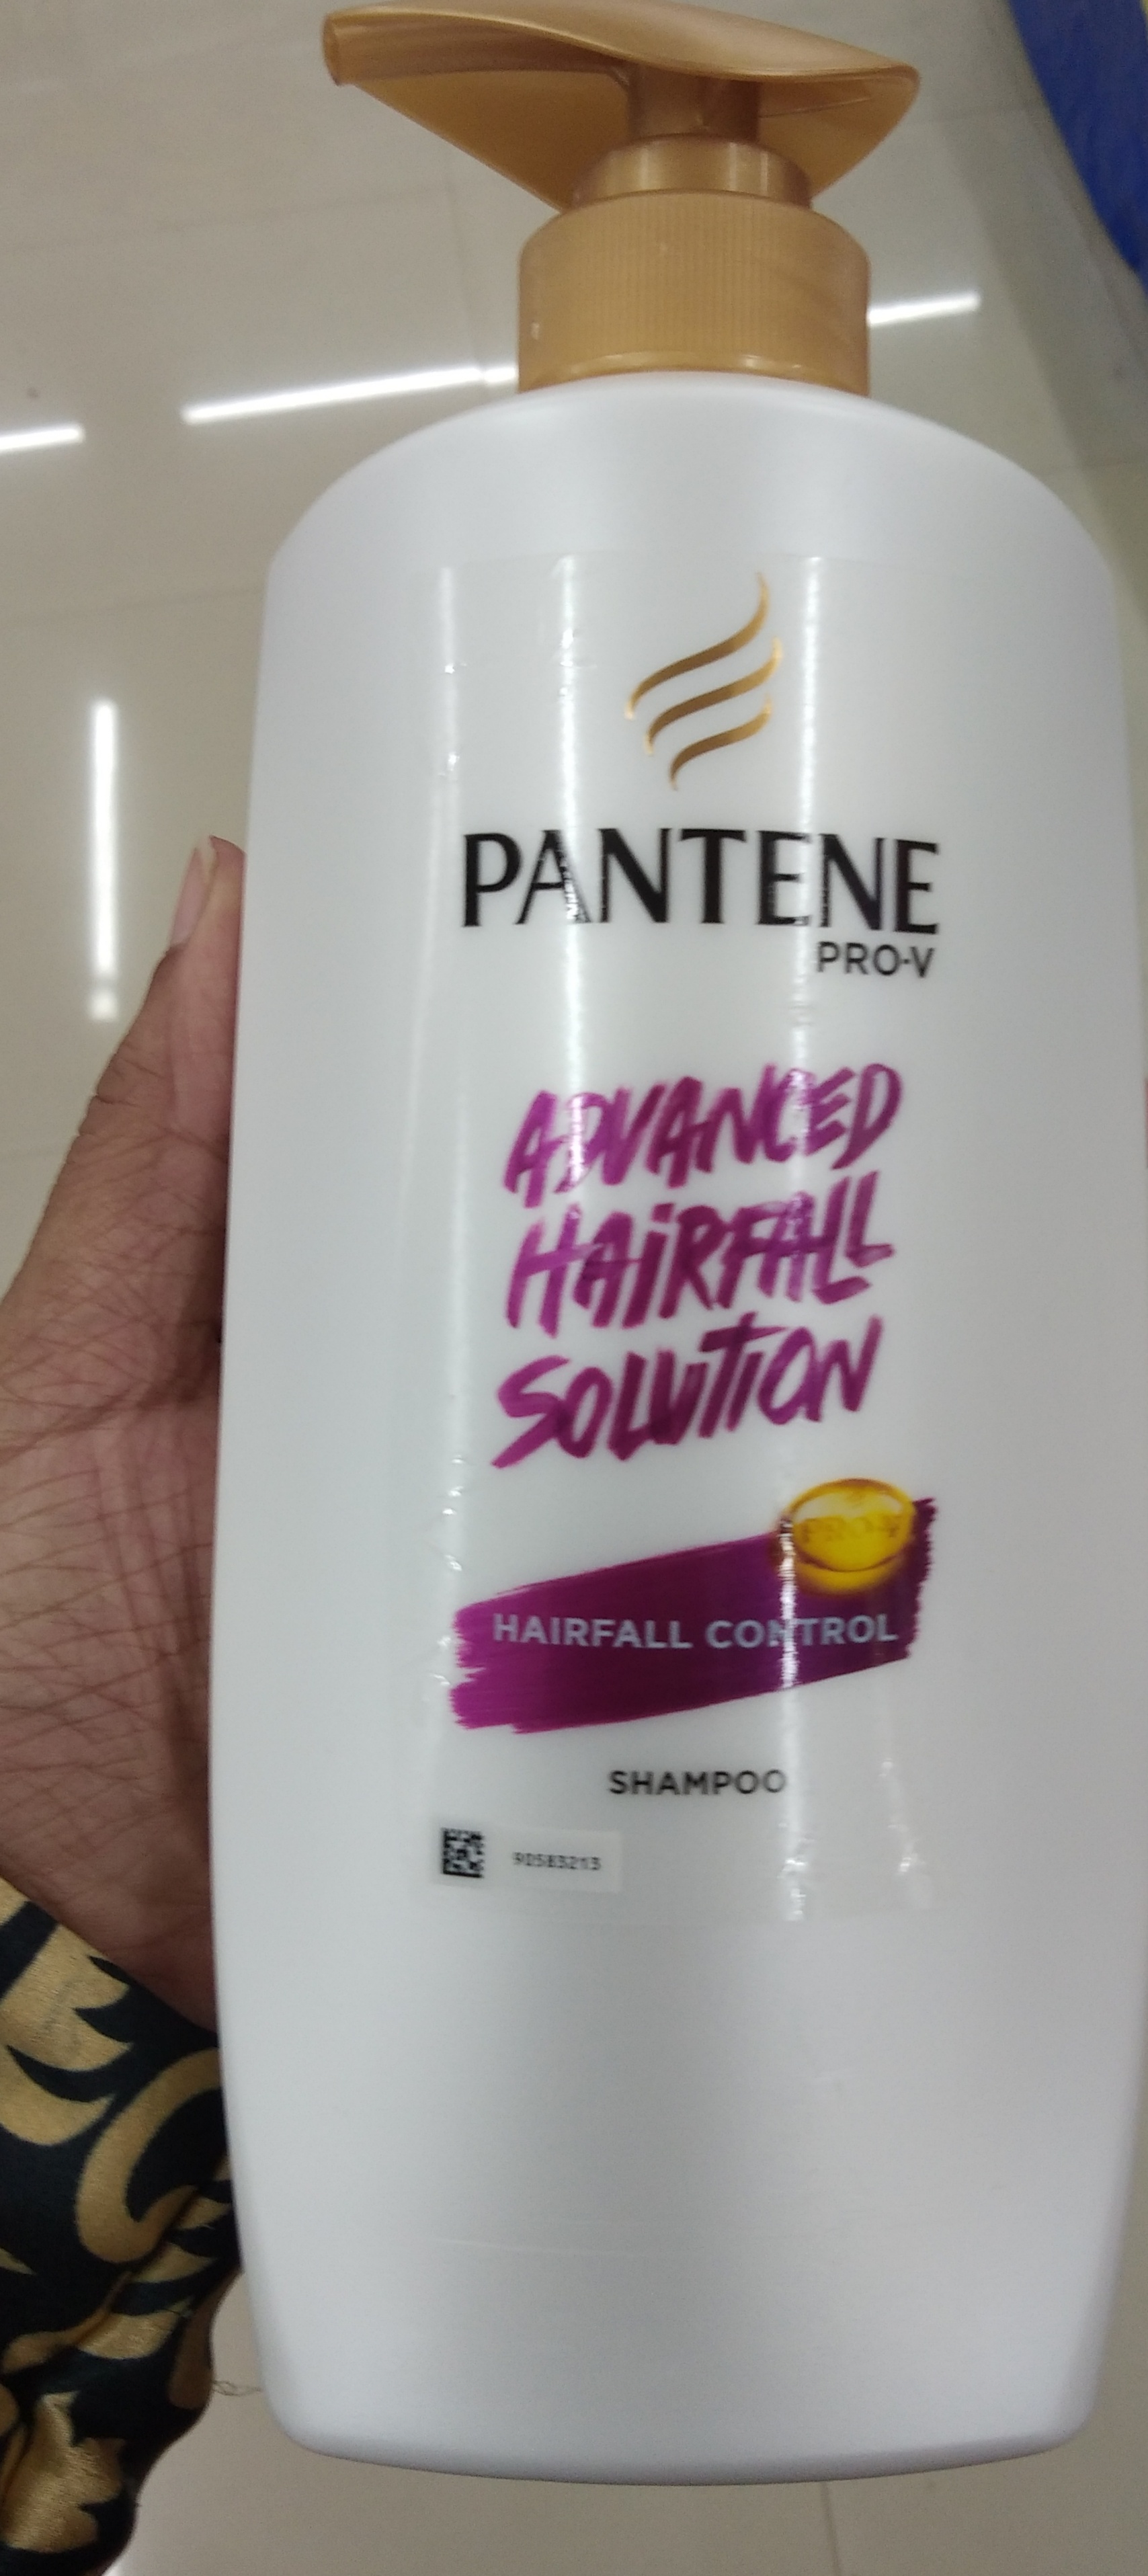 pantene-pro-v-hair-fall-control-shampoo-reviews-ingredients-benefits-how-to-use-price